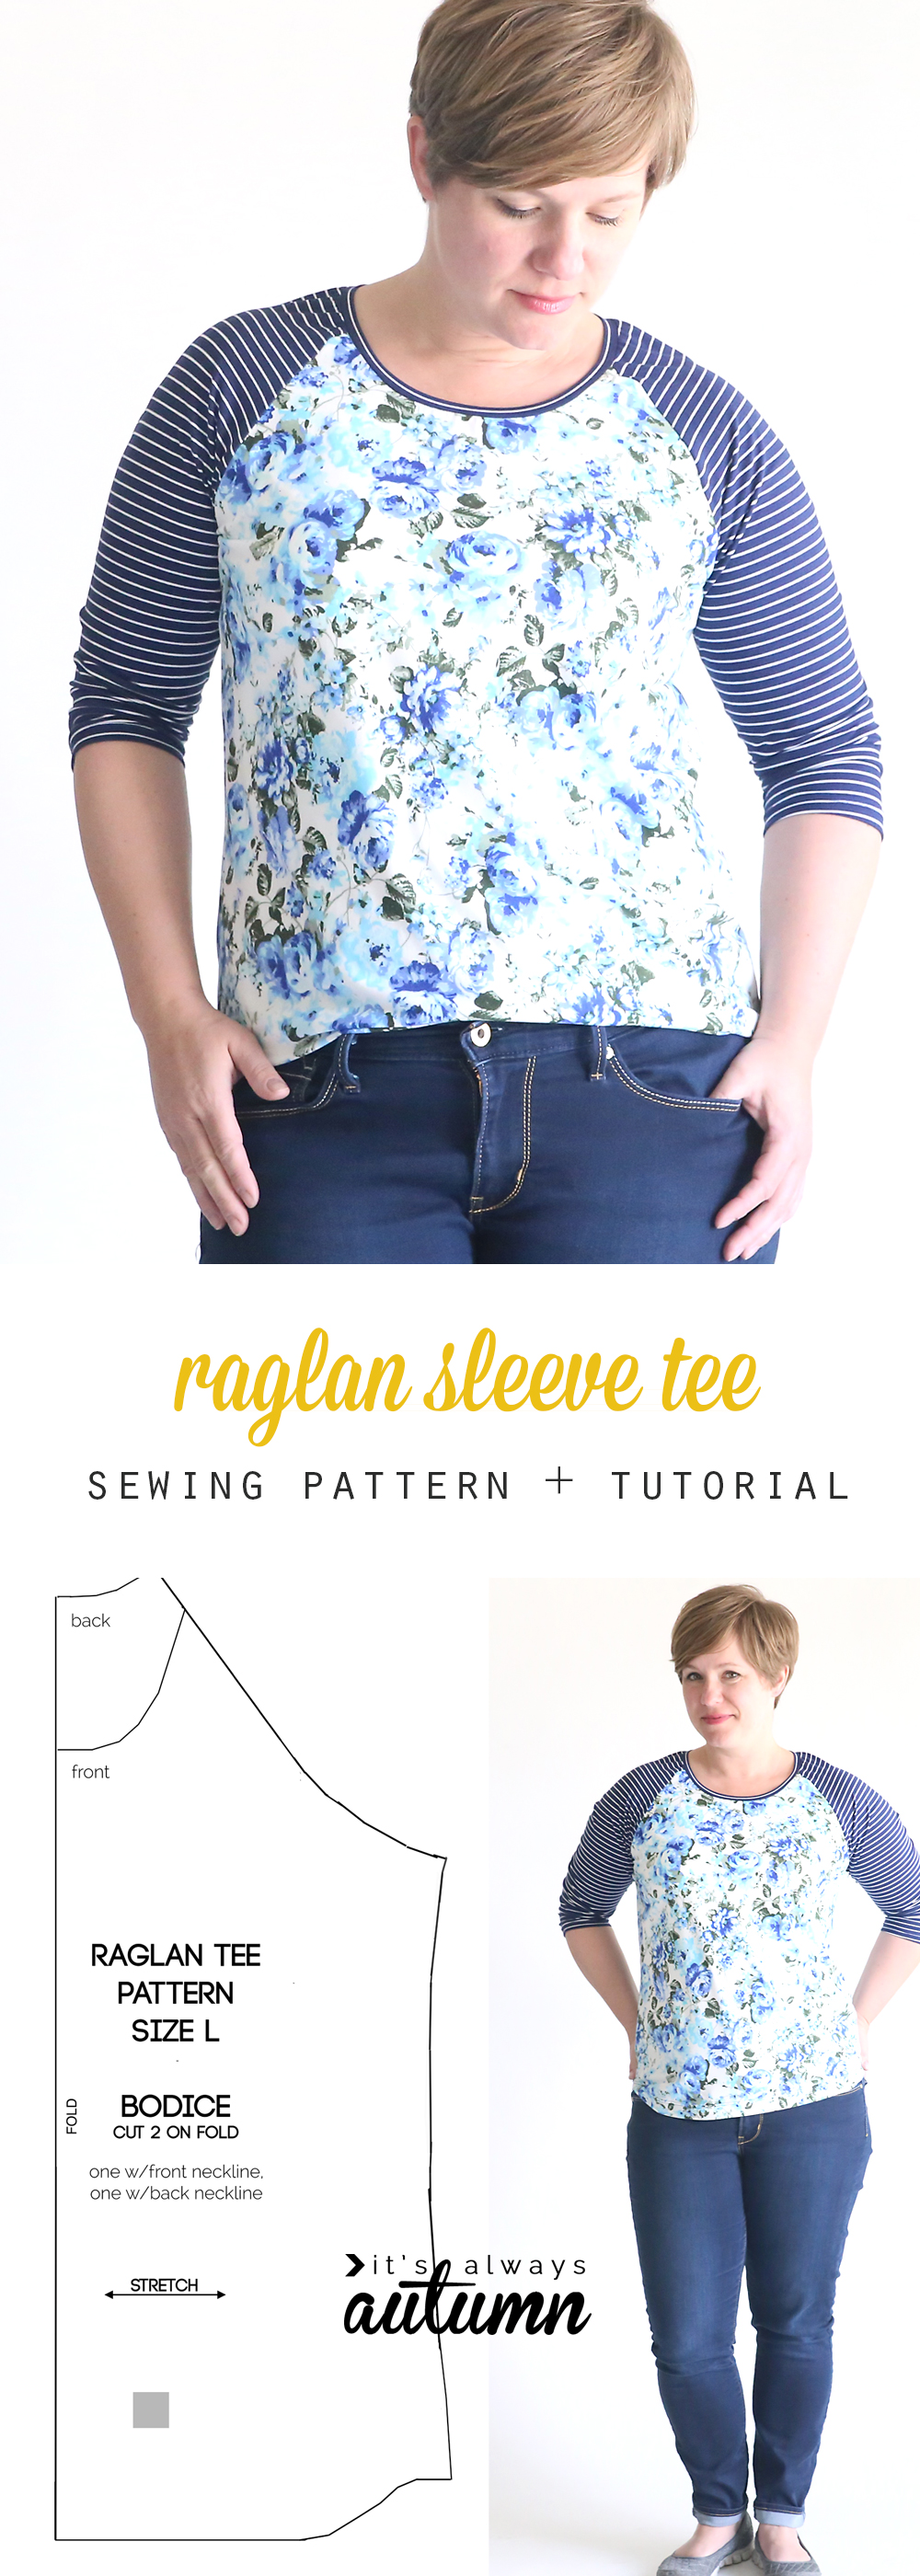 A woman wearing a raglan sleeve t-shirt and a sewing pattern